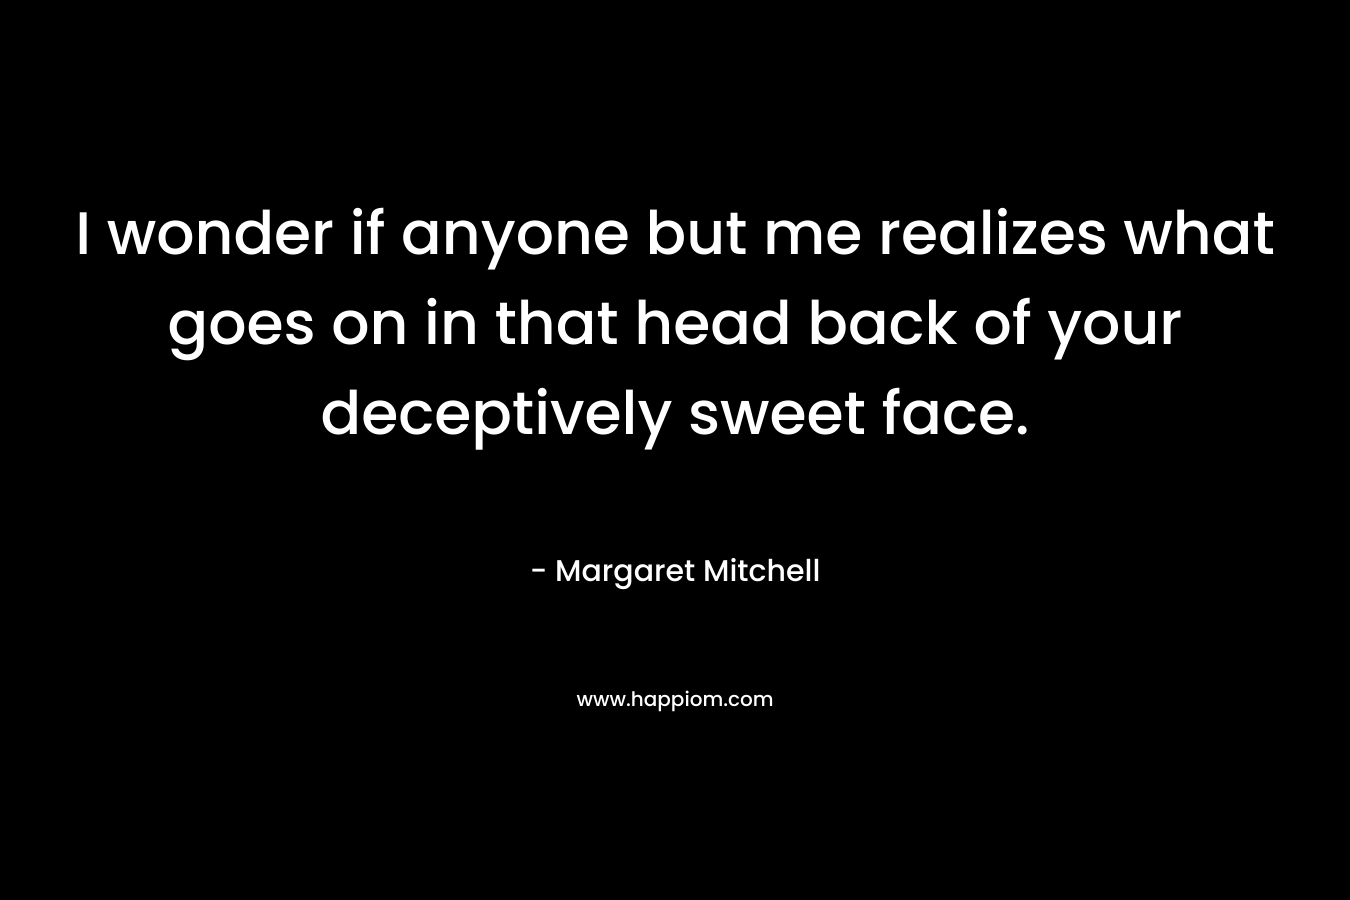 I wonder if anyone but me realizes what goes on in that head back of your deceptively sweet face.